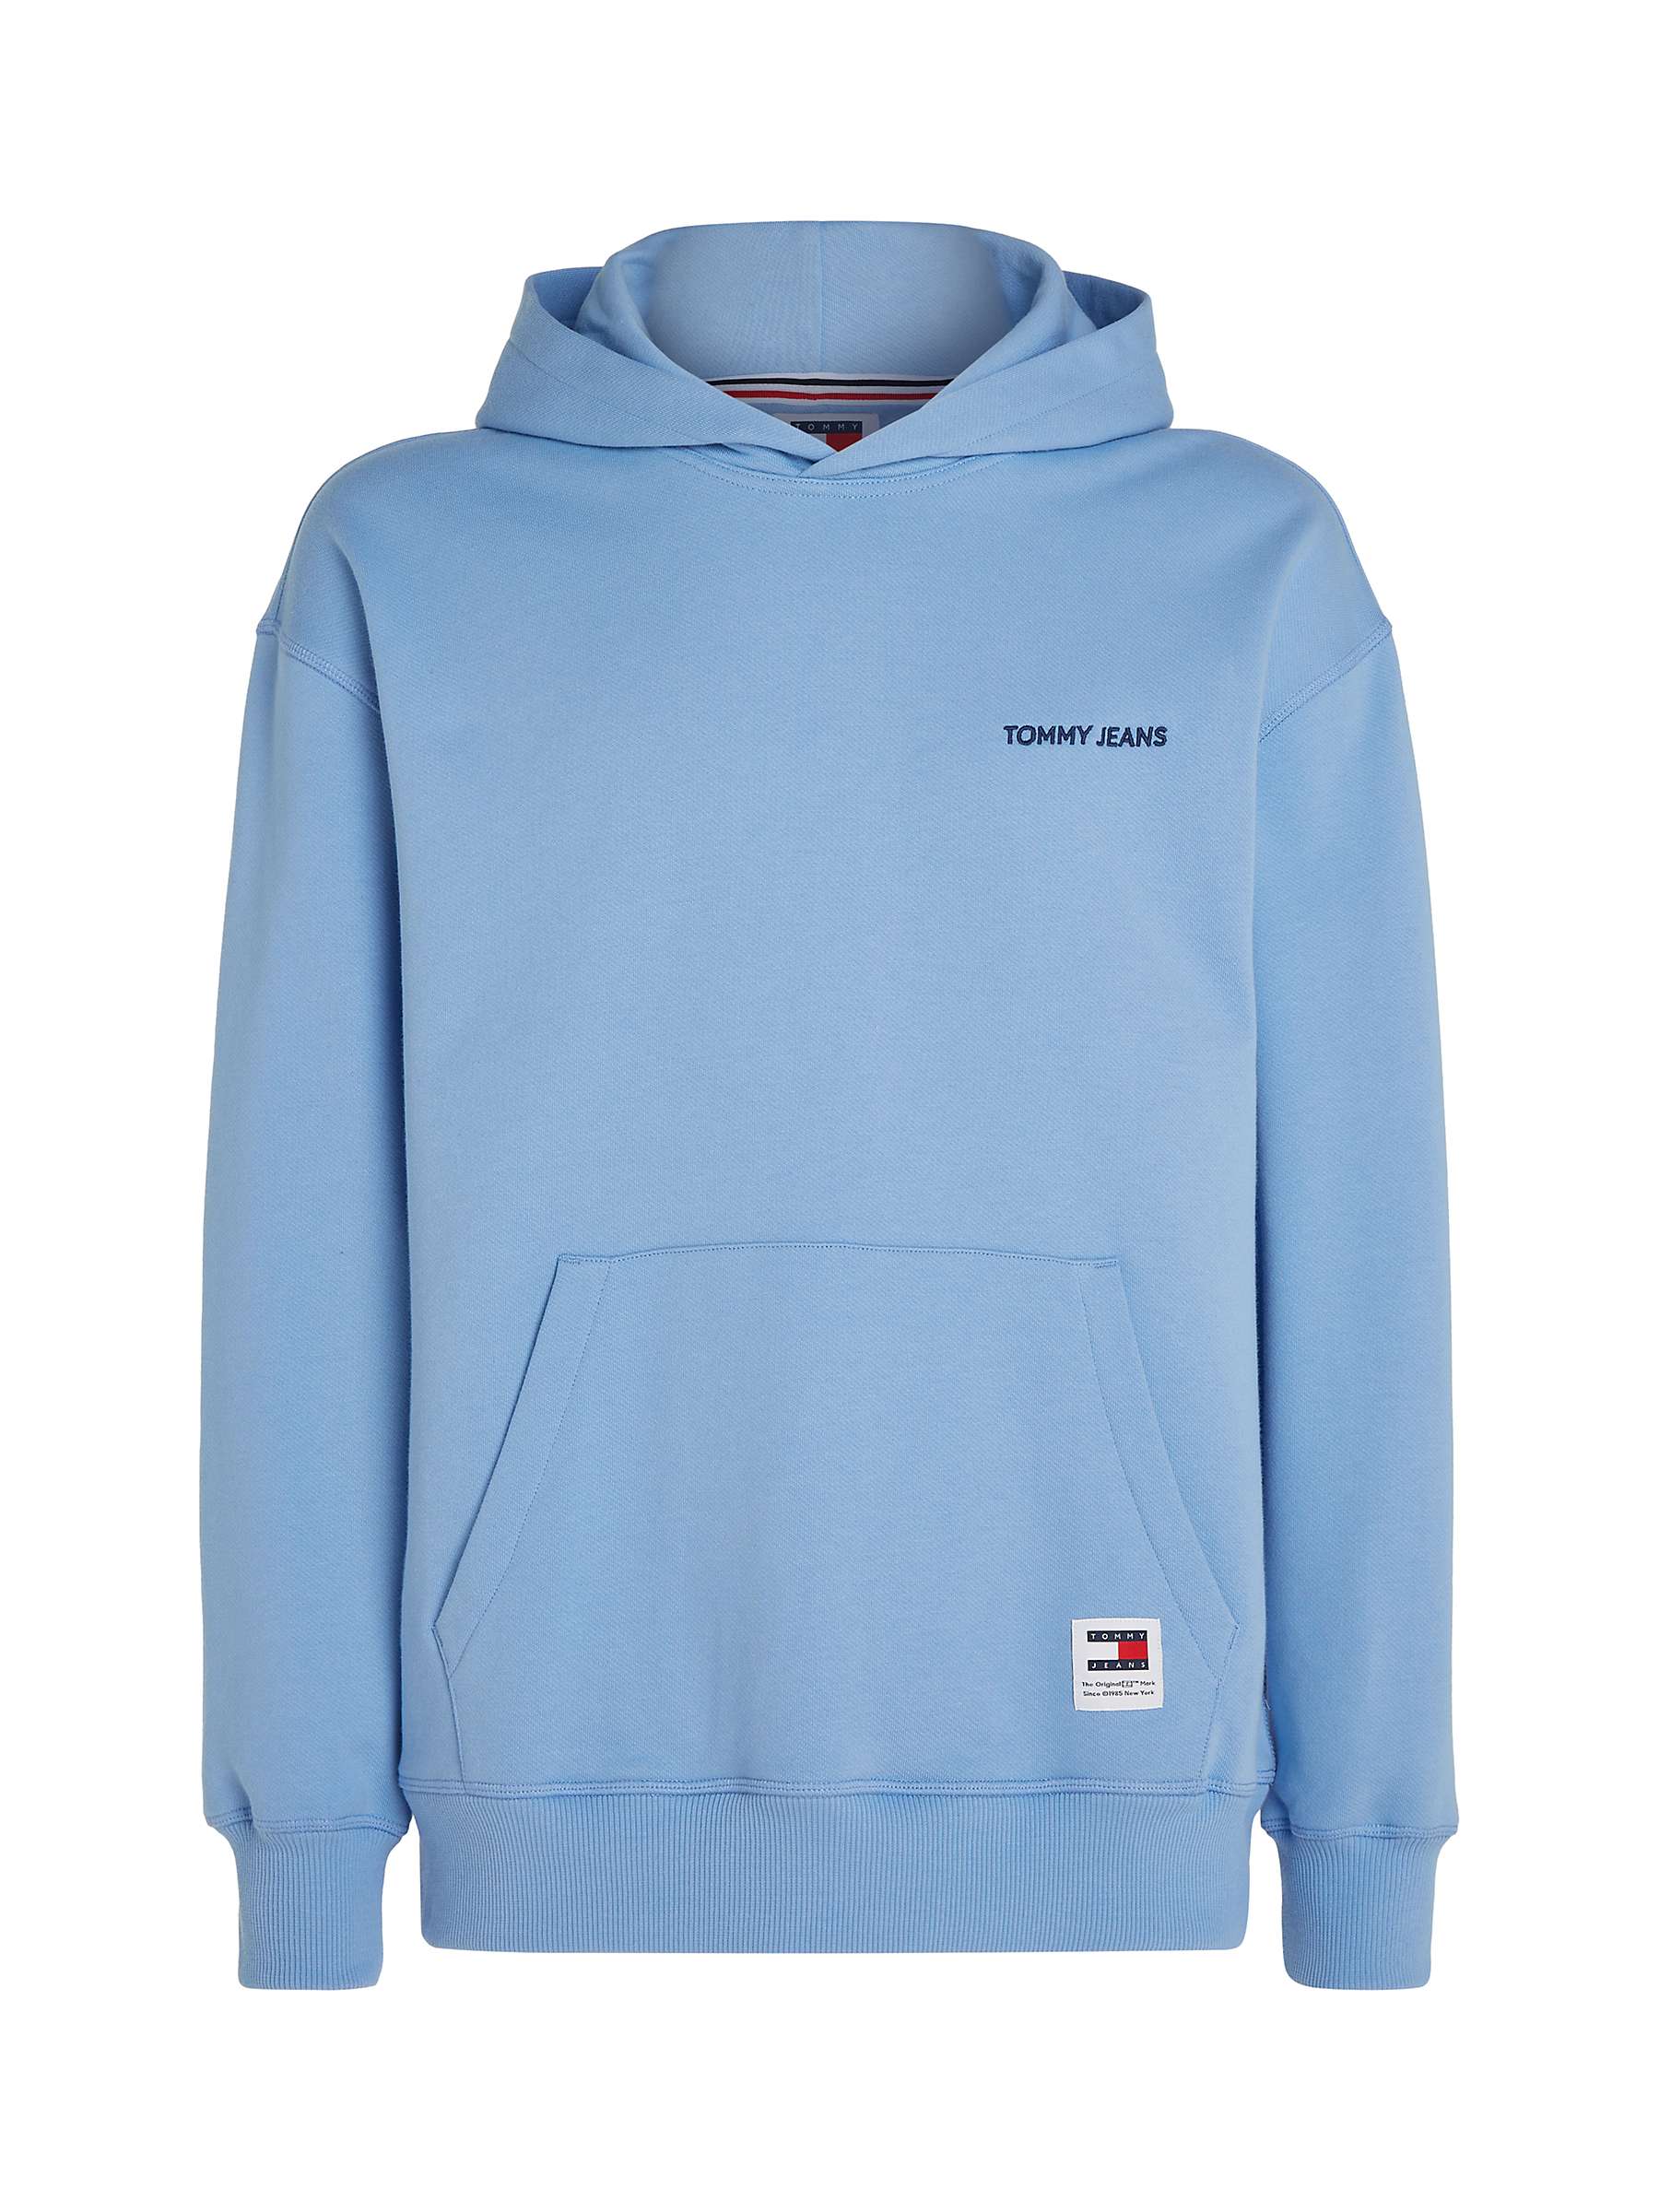 Buy Tommy Jeans Relaxed Cotton Hoodie, Moderate Blue Online at johnlewis.com